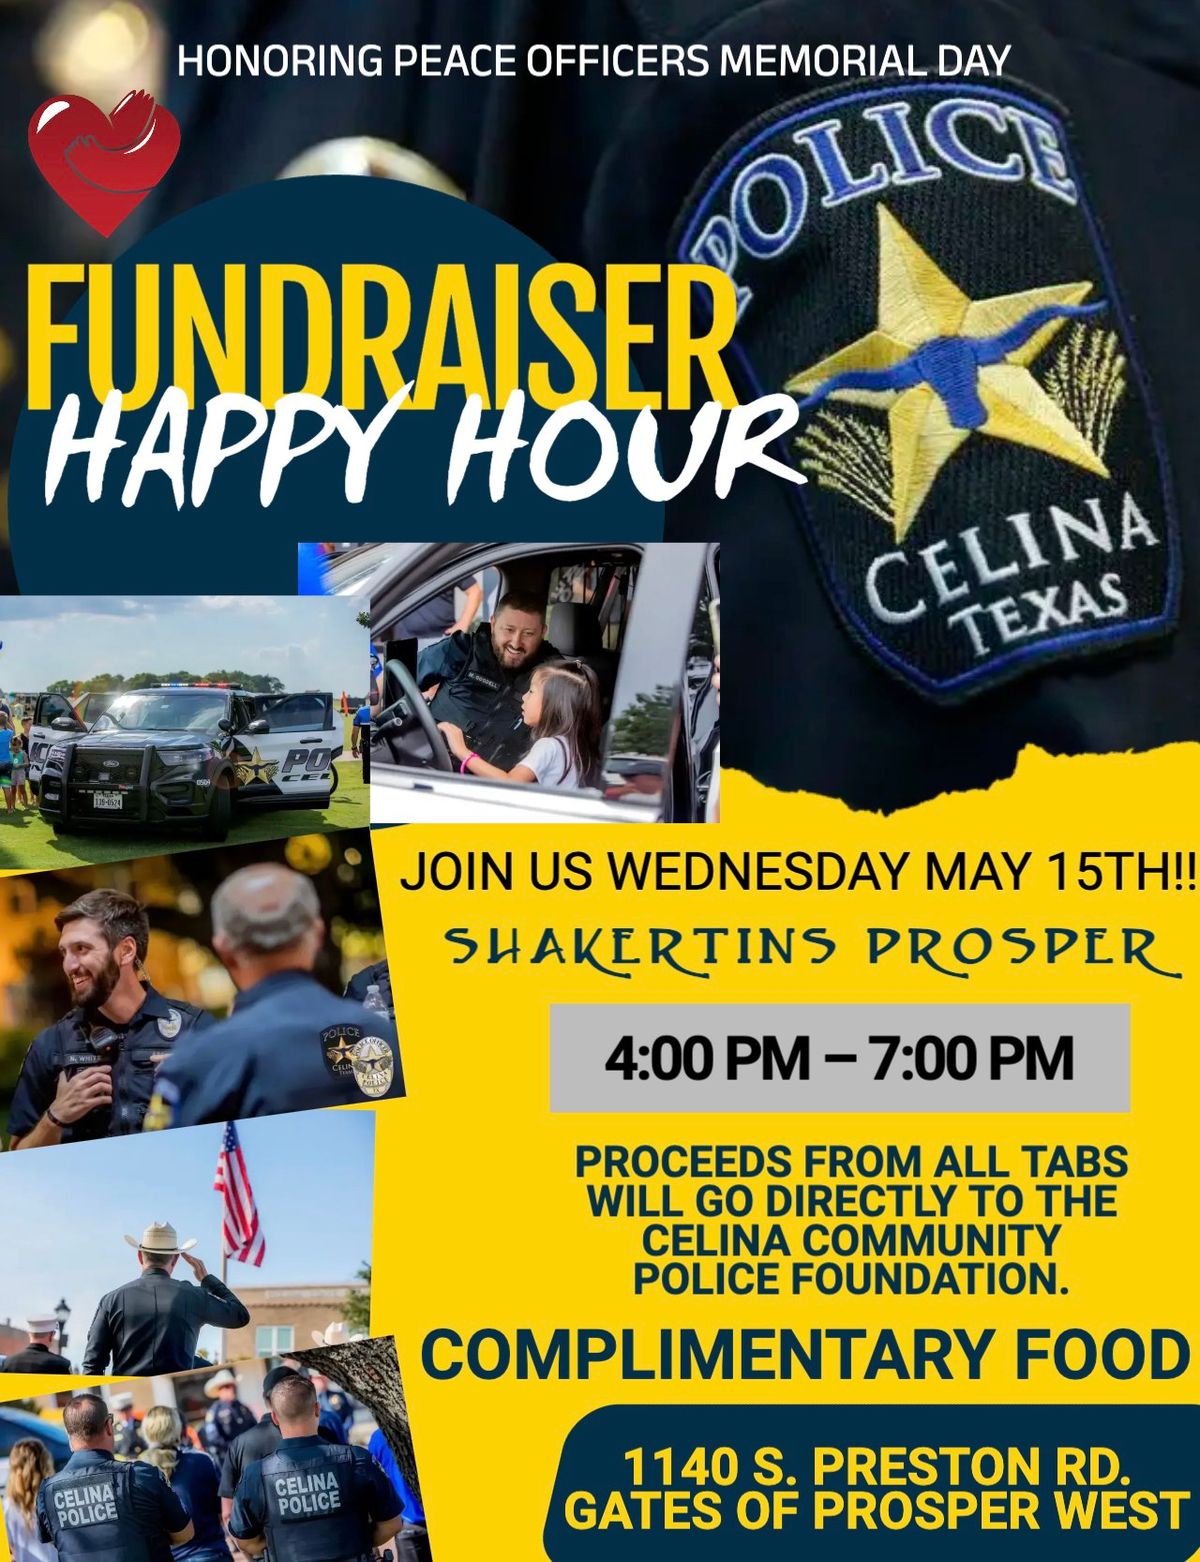 CELINA PD CHARITY FUNDRAISER HAPPY HOUR AT SHAKERTINS PROSPER